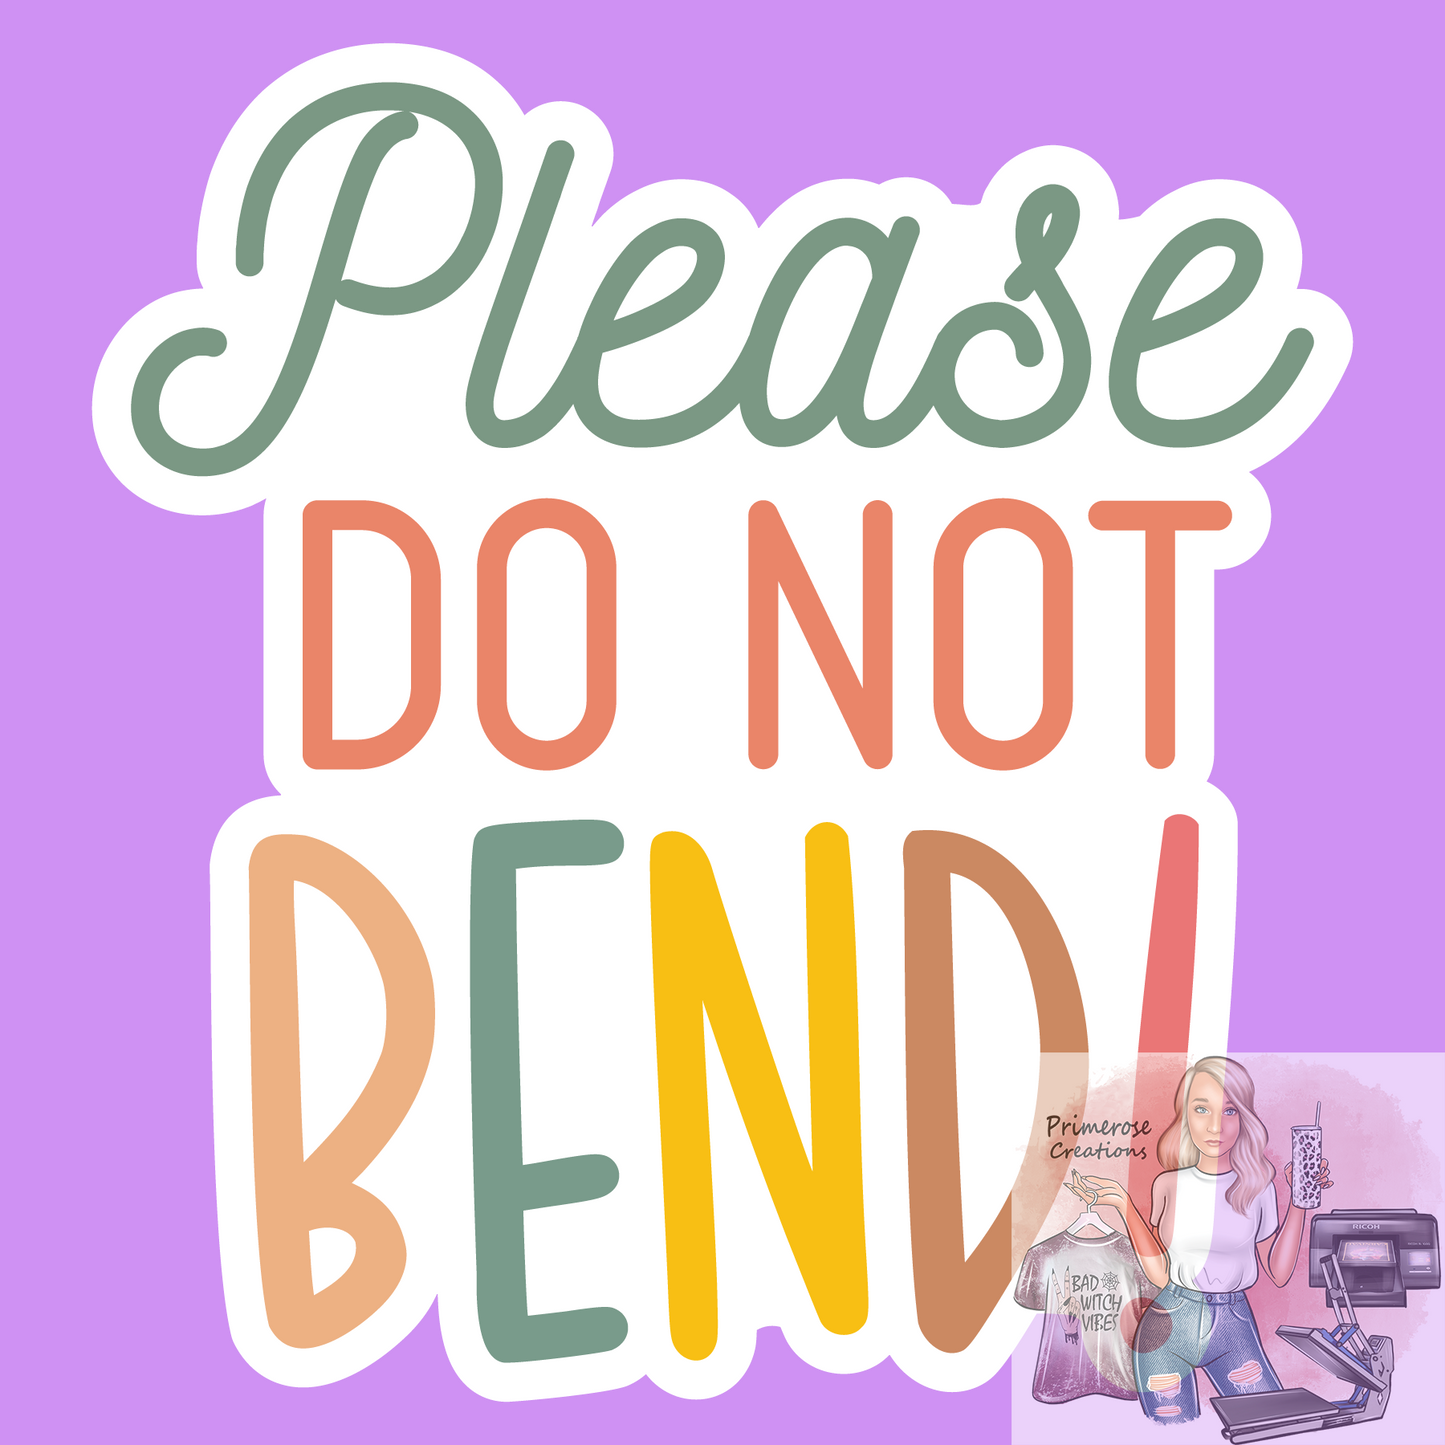 Please Do Not Bend Stickers